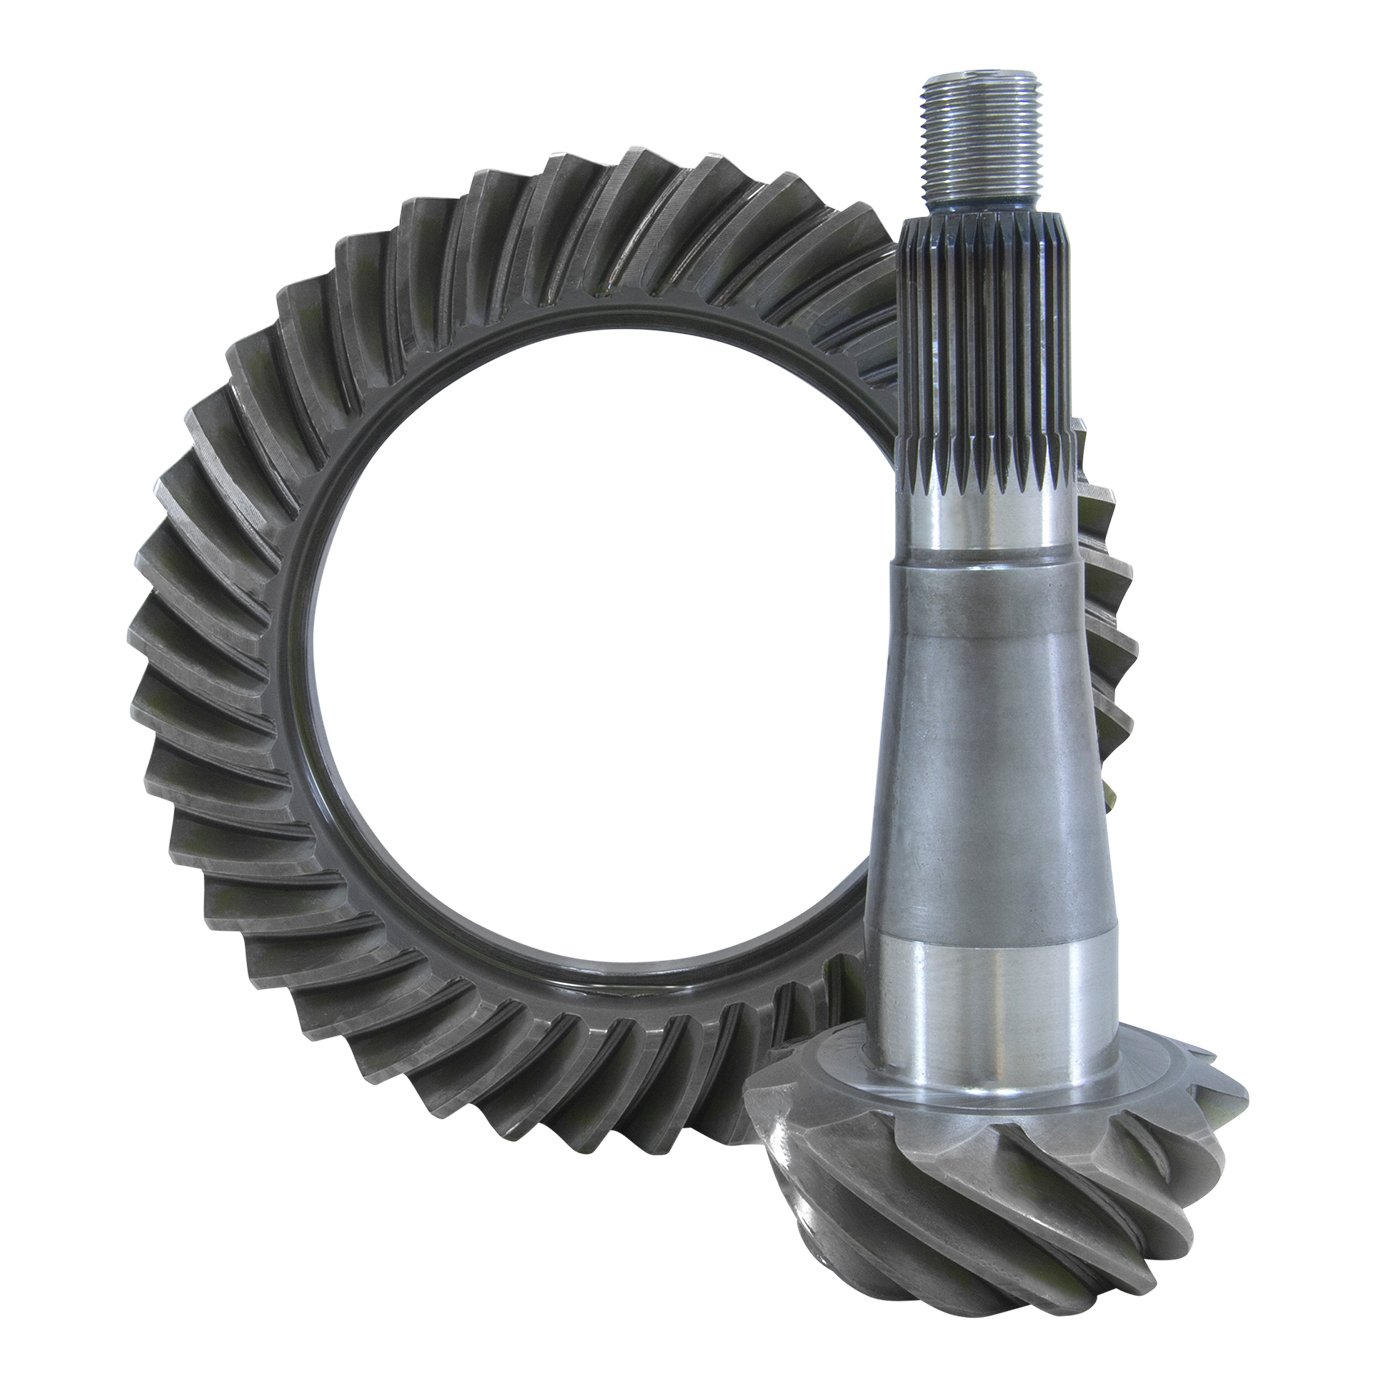 USA Standard ZG C8.89-355 Ring & Pinion Gear Set, For Chrysler 8.75 in. W/ 89 Housing, 3.55 Ratio